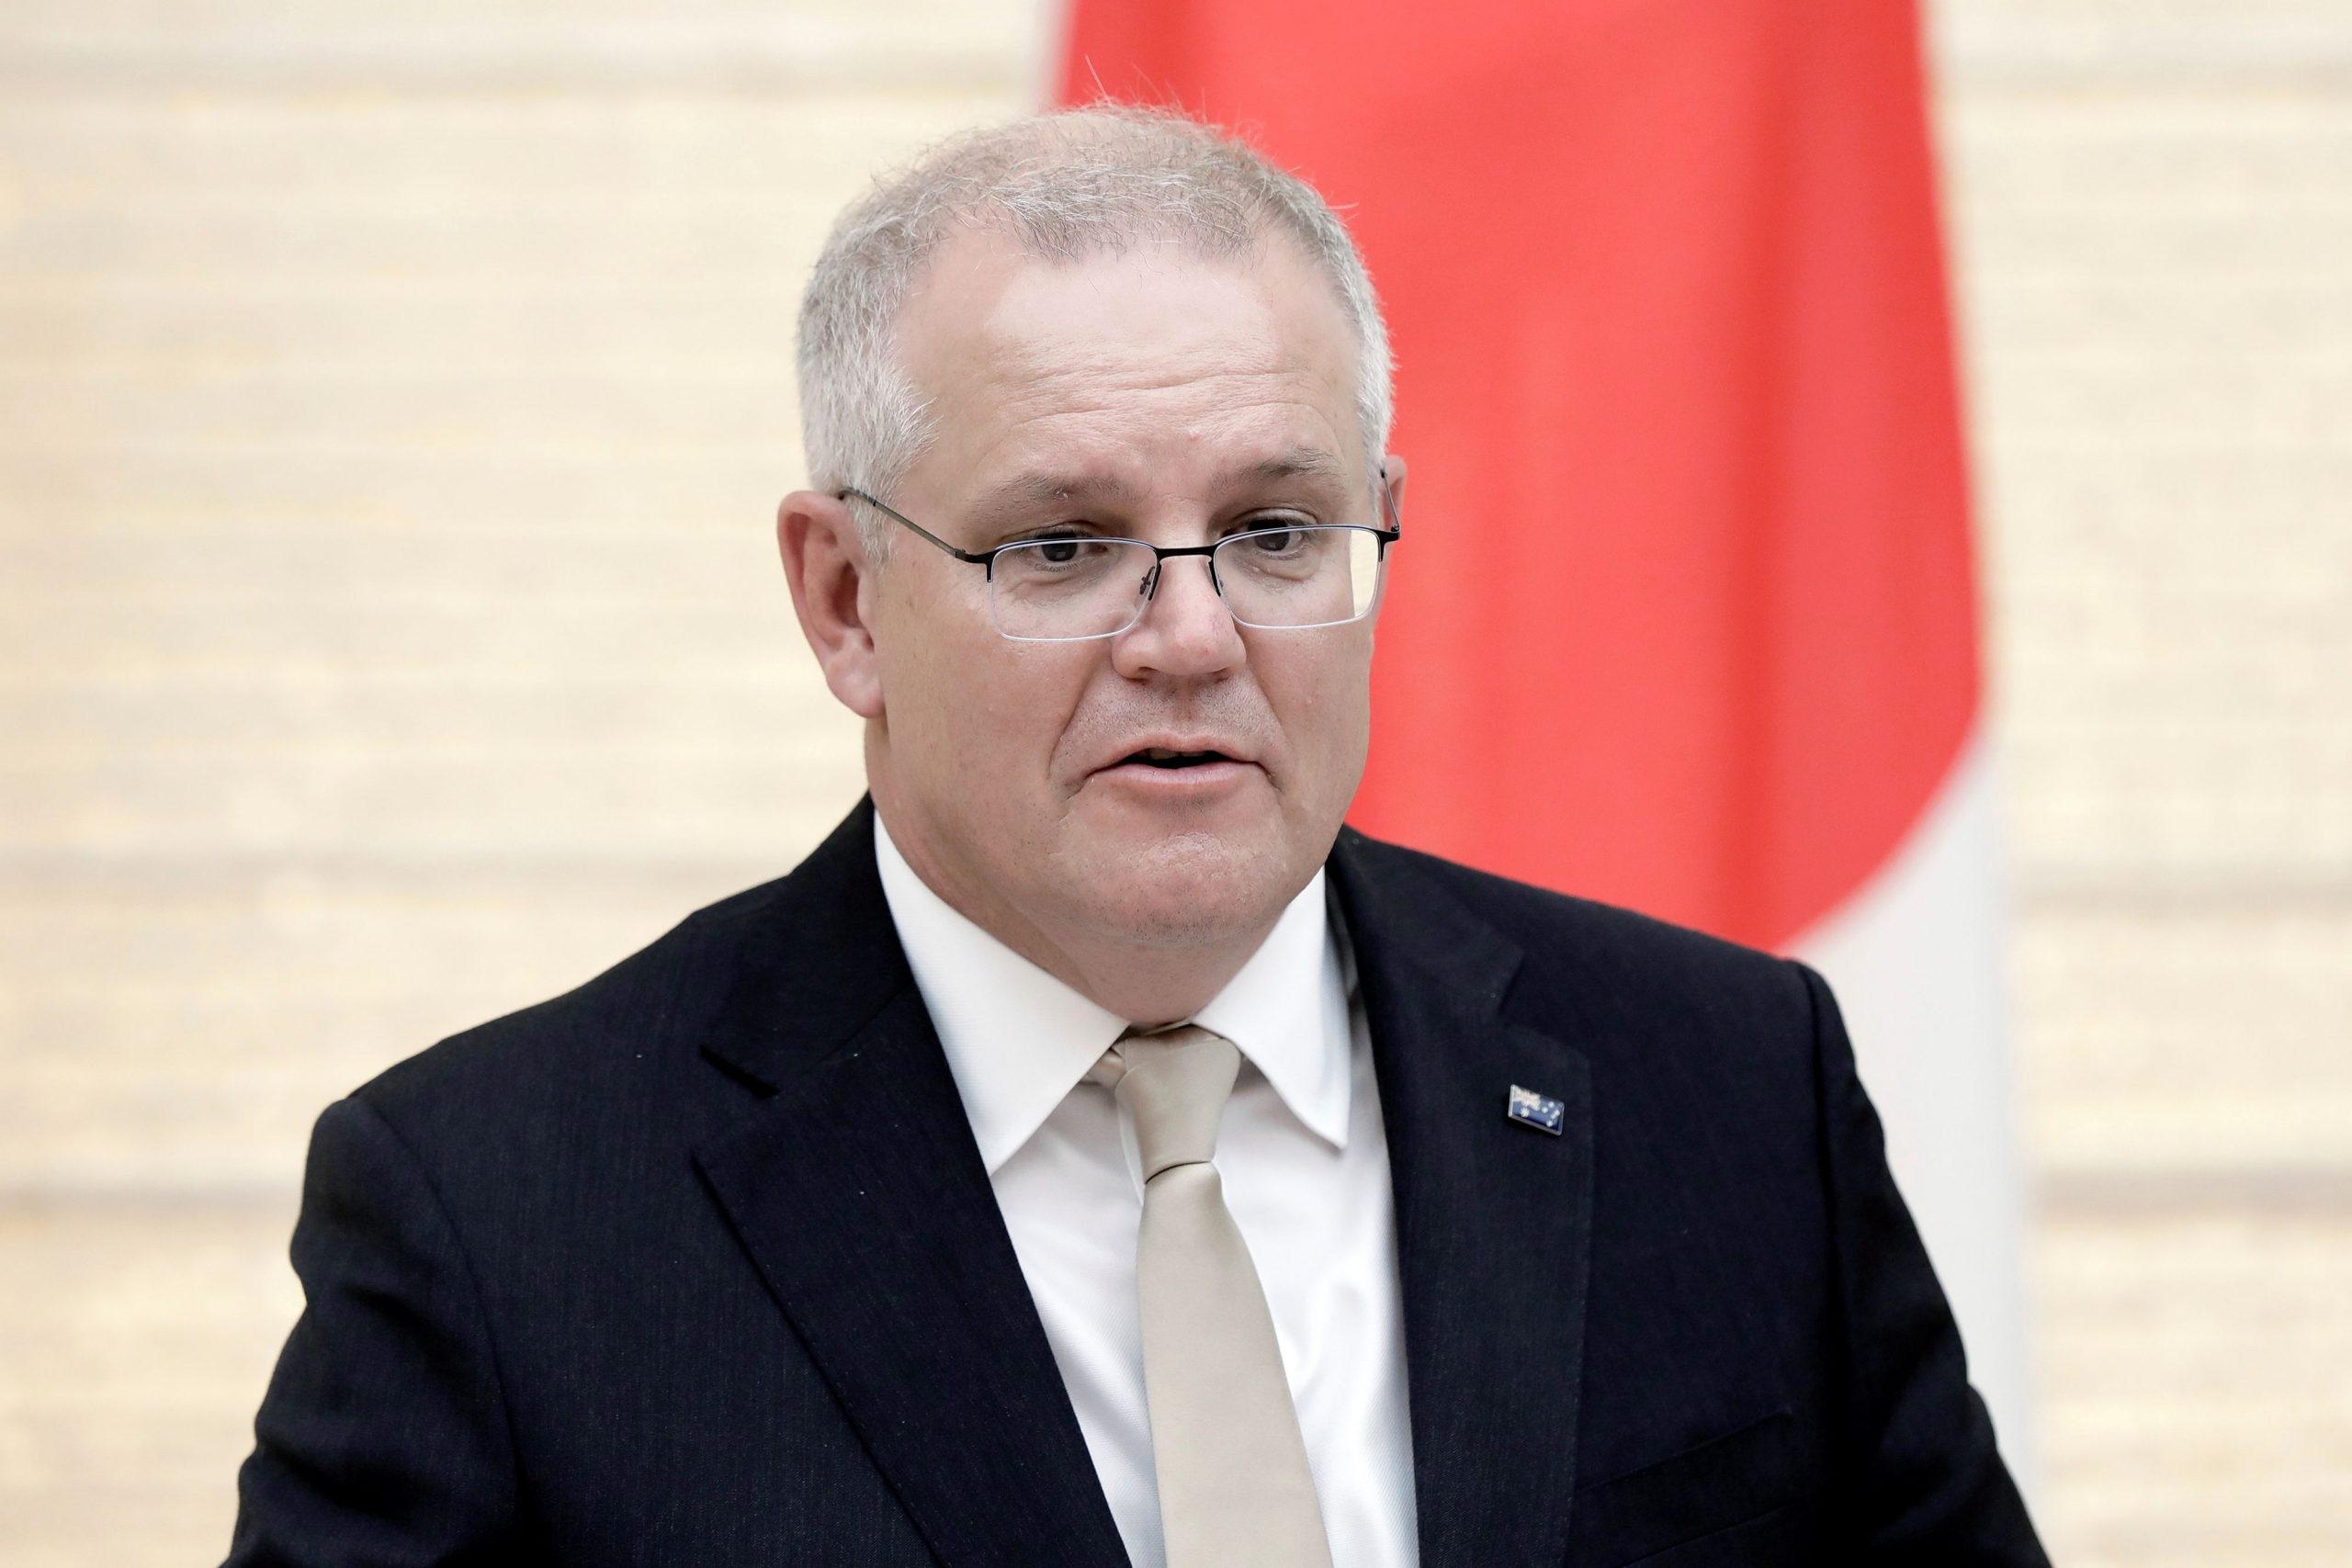 ‘Chinese government should be ashamed’: Australian PM lambasts ‘outrageous’ tweet